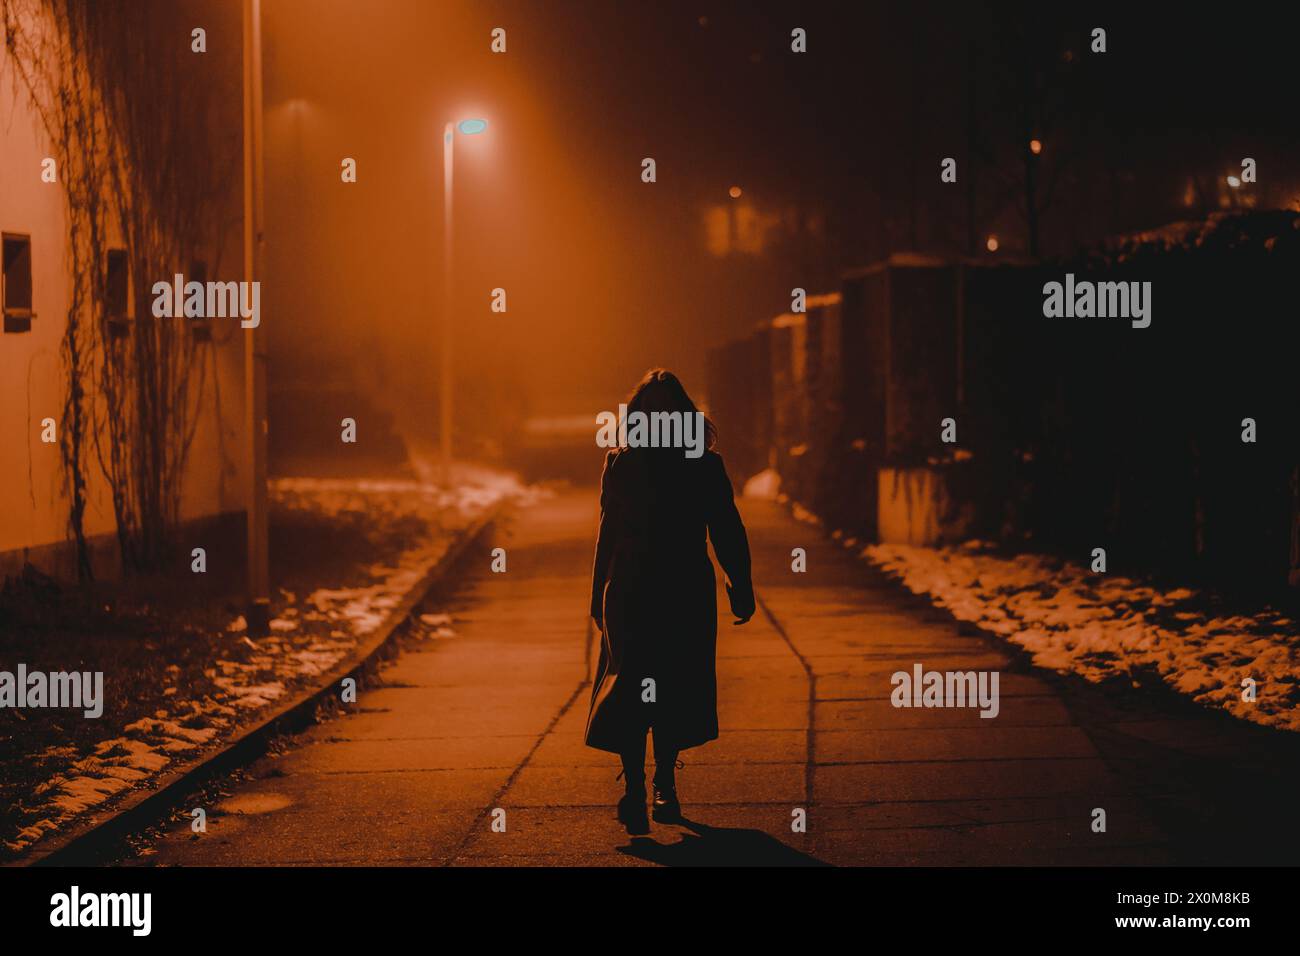 Silhouette of a young woman walking through a city at night. Stock Photo